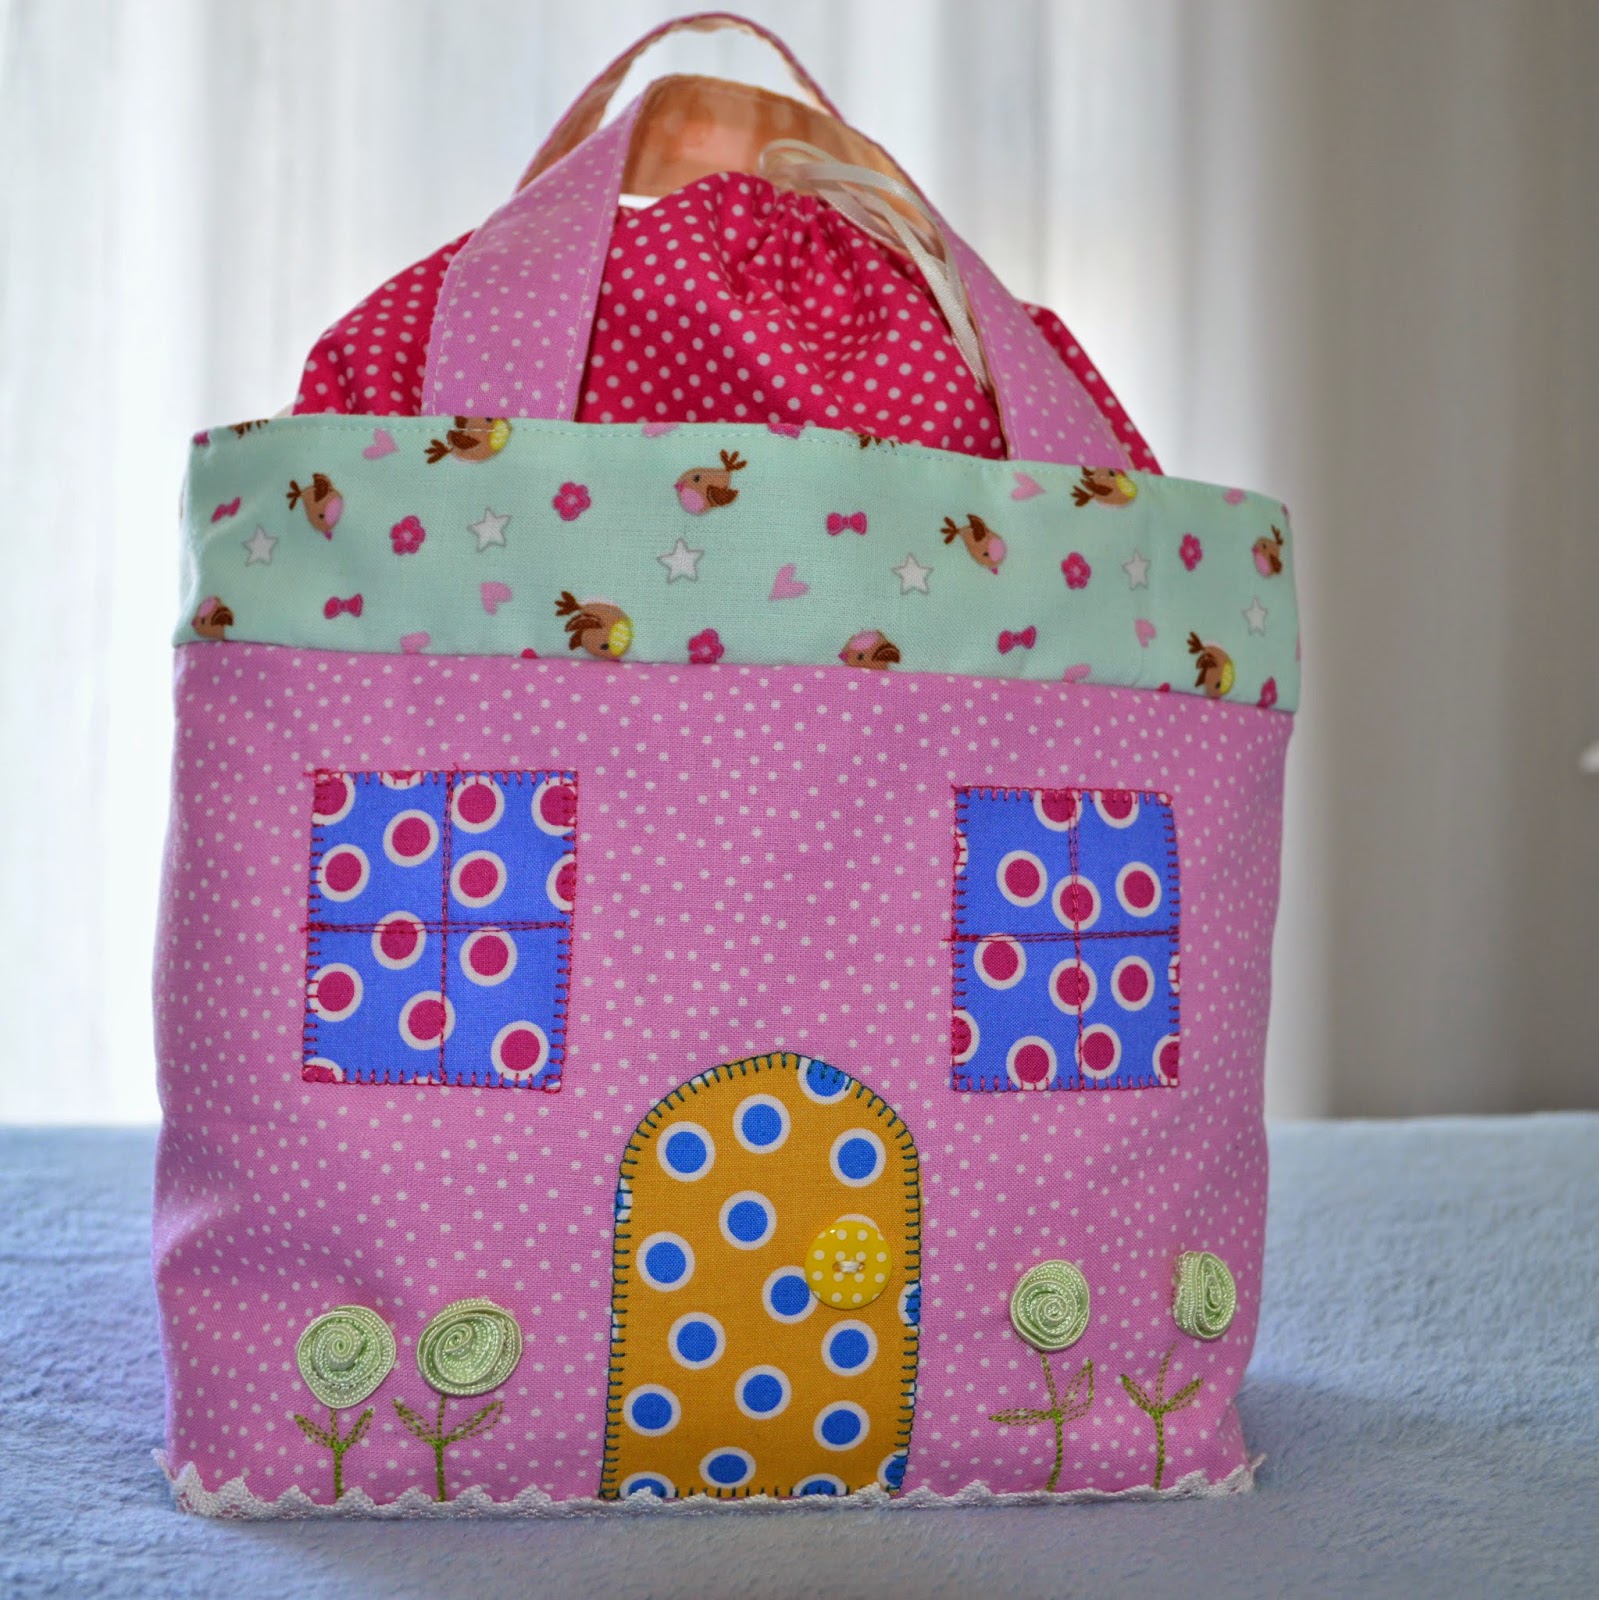 Gee's Projects: Fabric child's bag